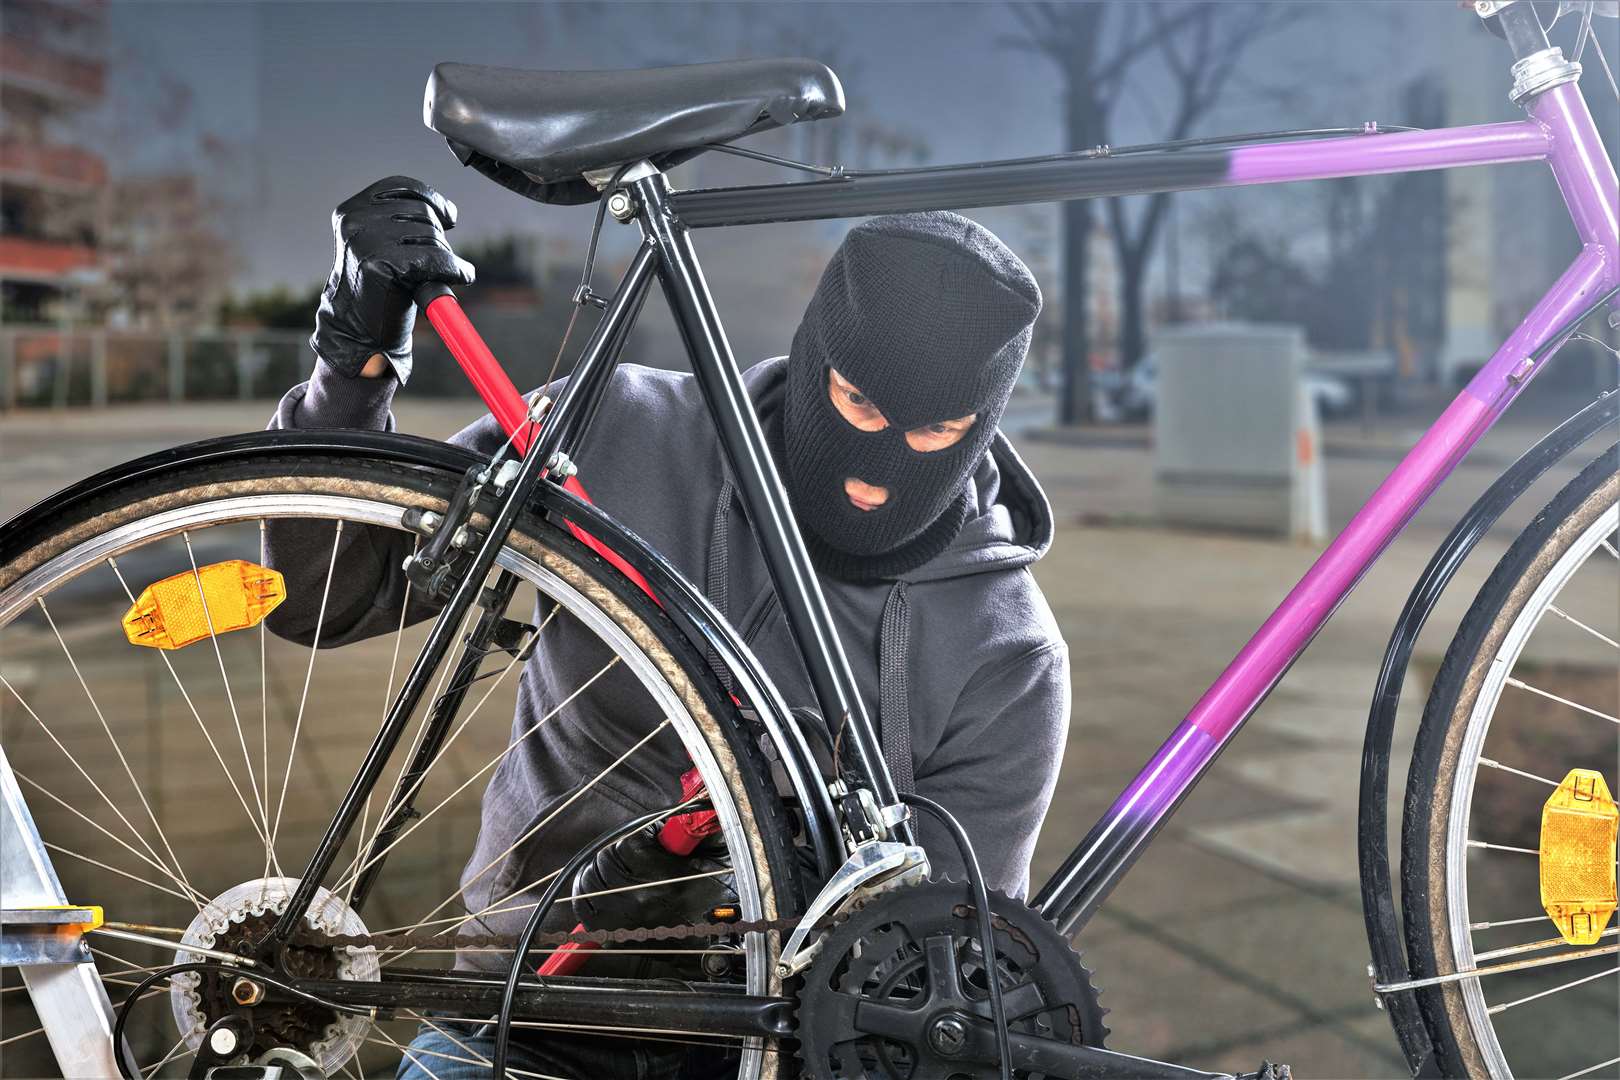 Thief trying to break a bicycle lock.